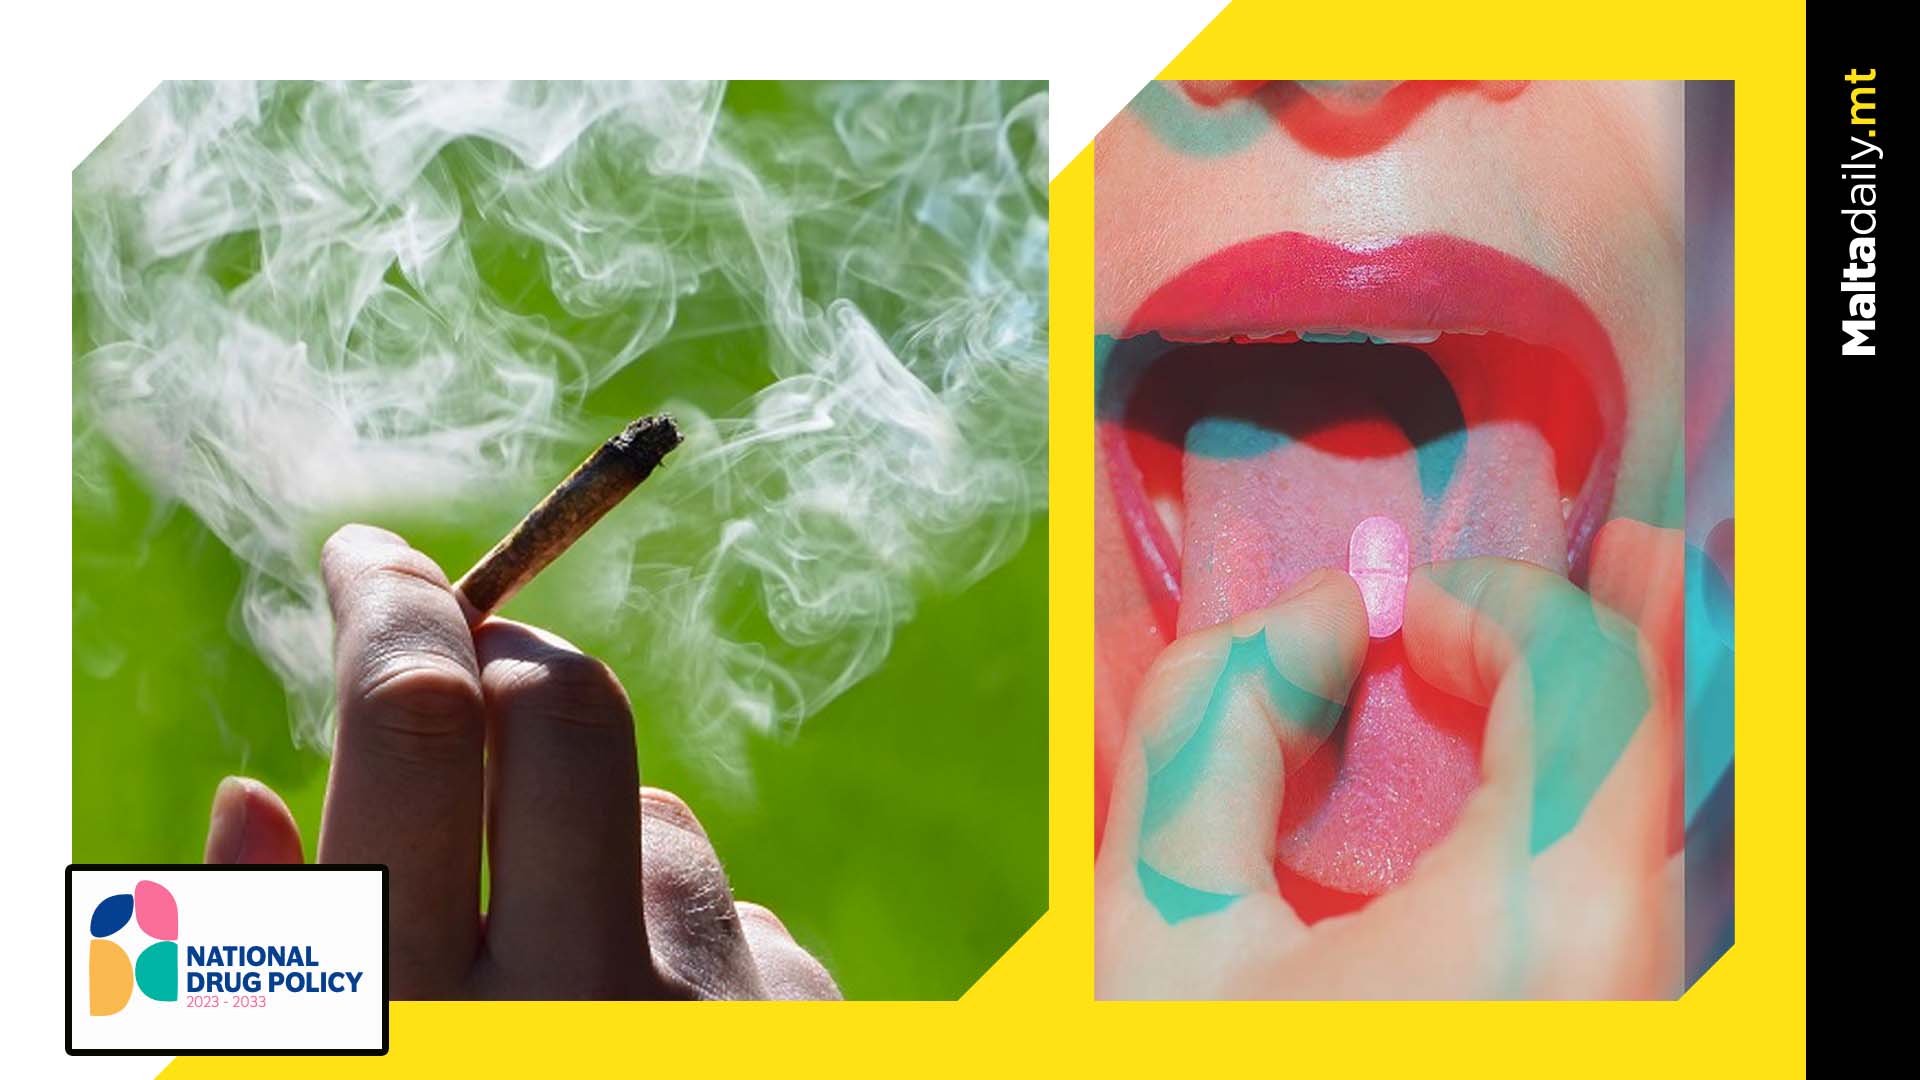 Cannabis, cocaine, ecstasy, heroin & synthetic most popular with Maltese youth